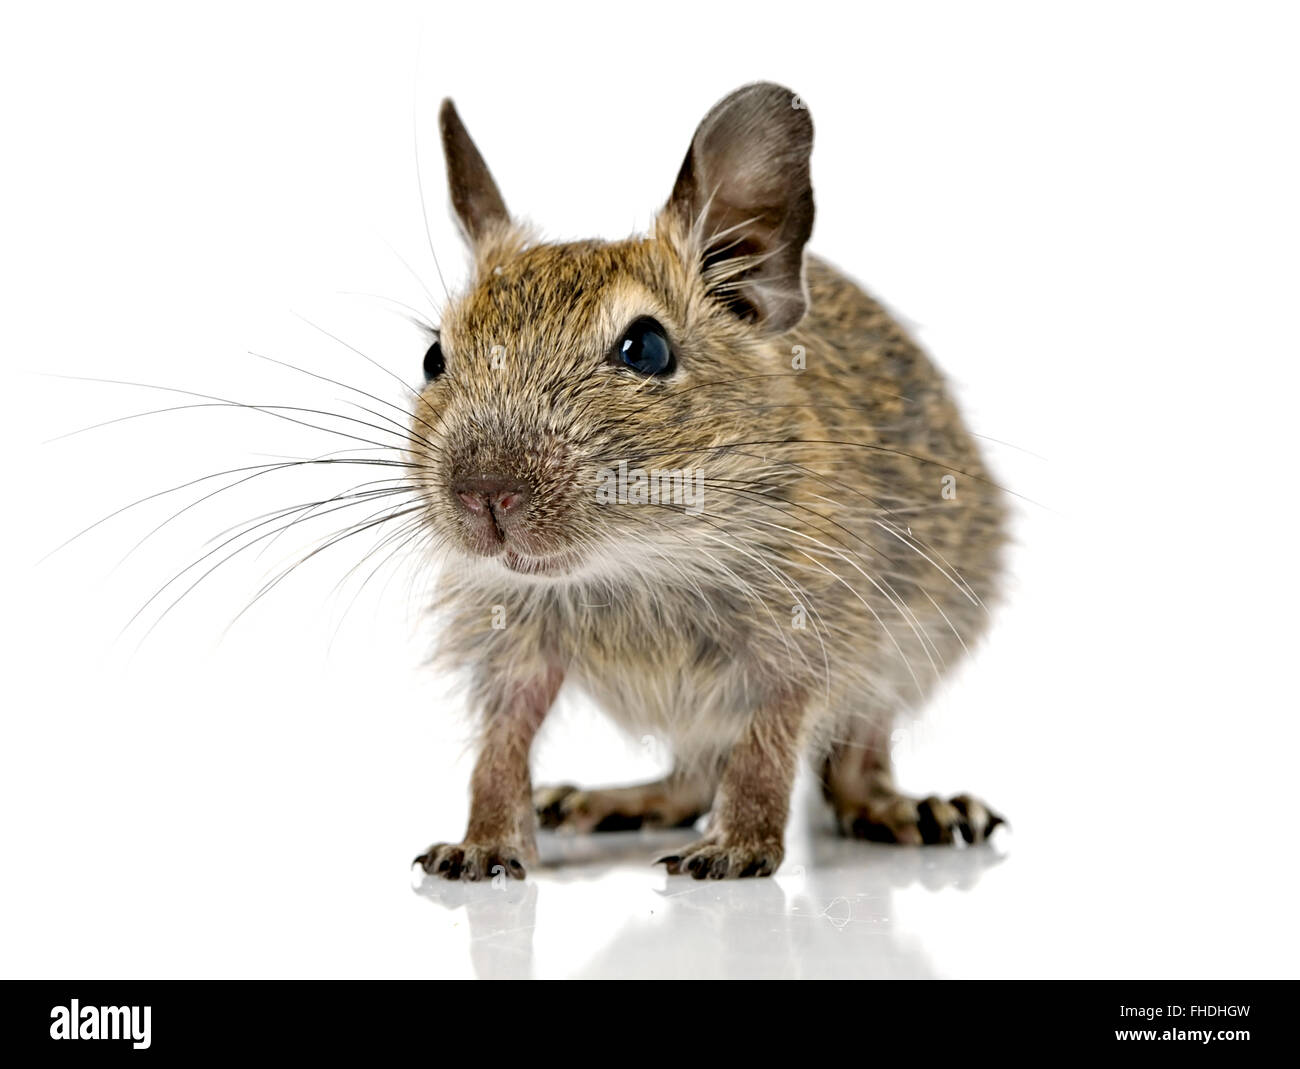 baby rodent degu mouse Stock Photo